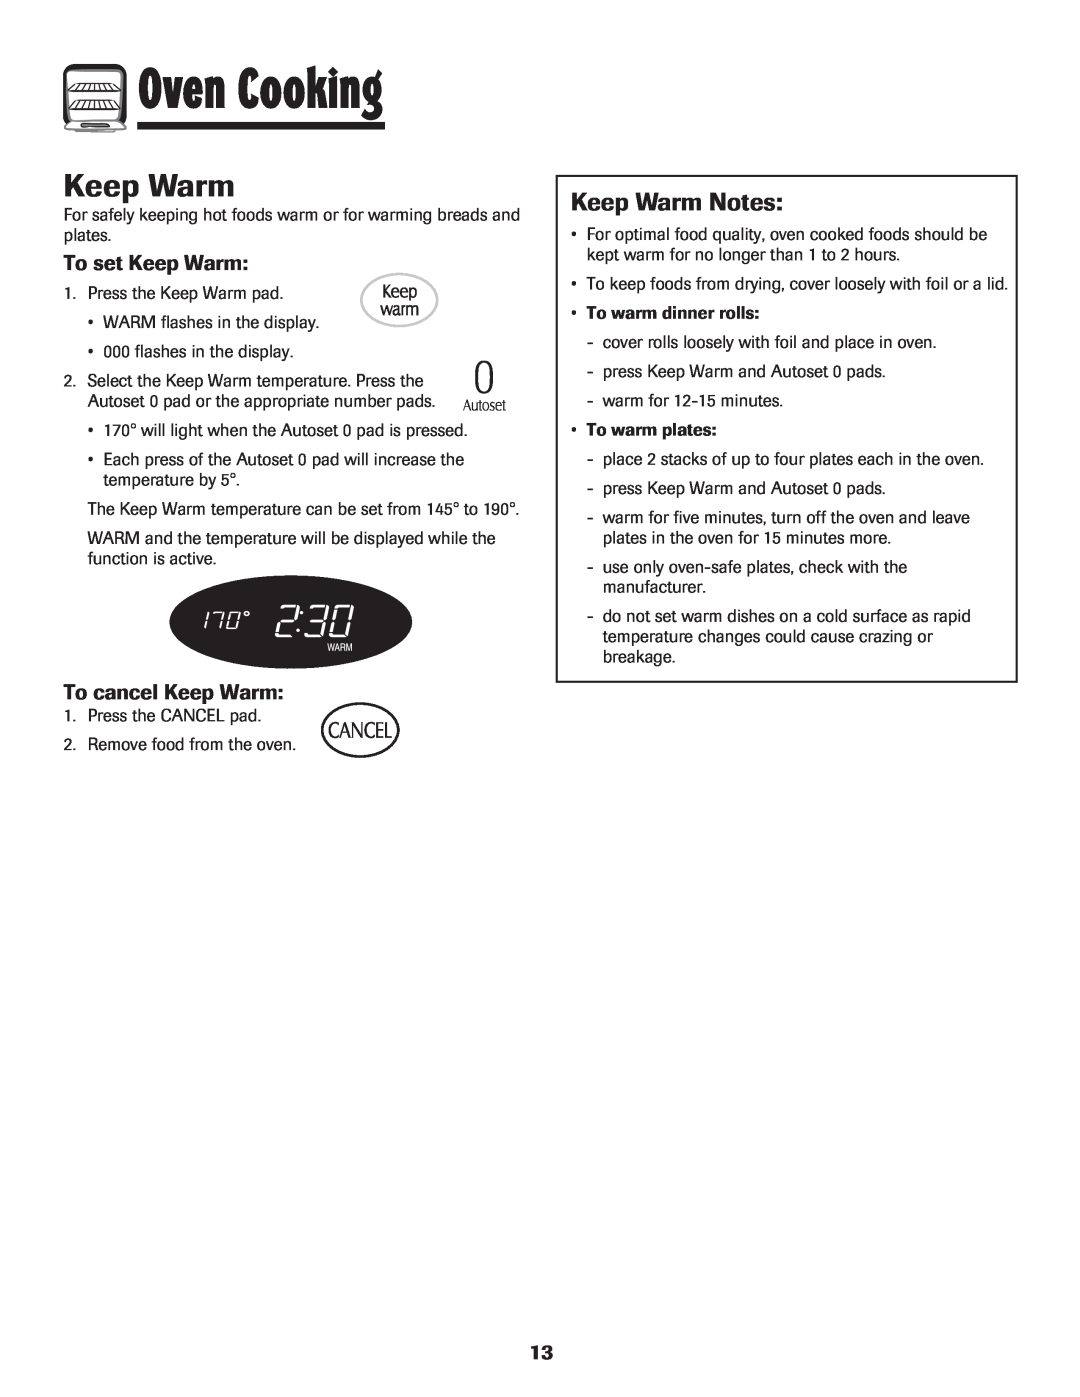 LG Electronics 800 important safety instructions Keep Warm Notes, To set Keep Warm, To cancel Keep Warm, Oven Cooking 